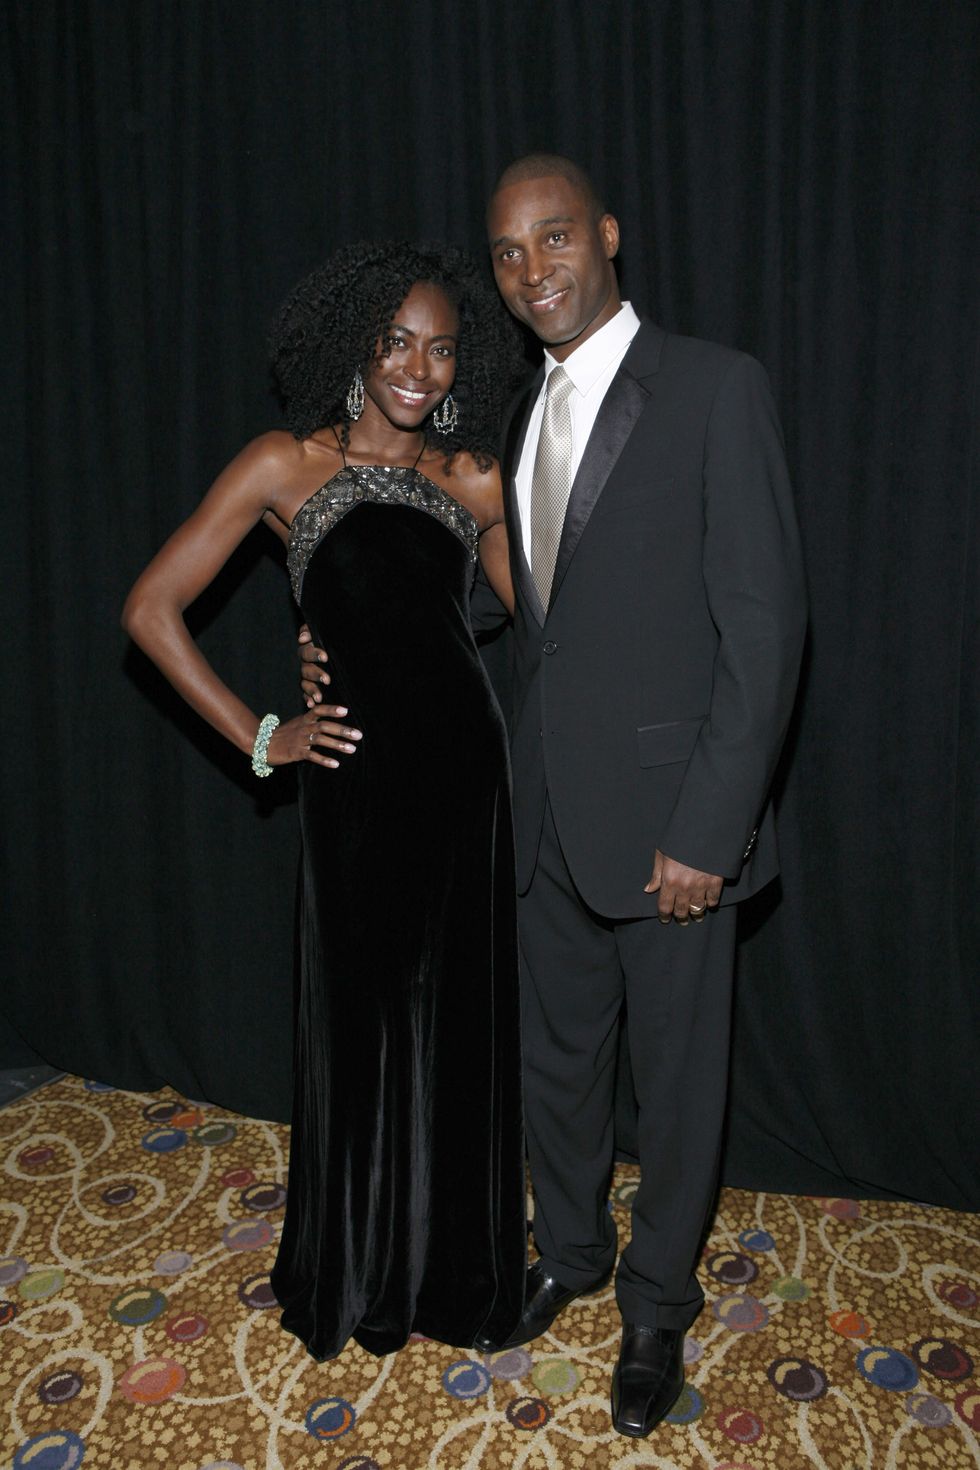 new york   december 02 prince kunle omilana r and wife princess keisha omilana of nigeria attend the alvin ailey opening night gala party at the hilton hotel on december 2, 2009 in new york city photo by john lamparskiwireimage